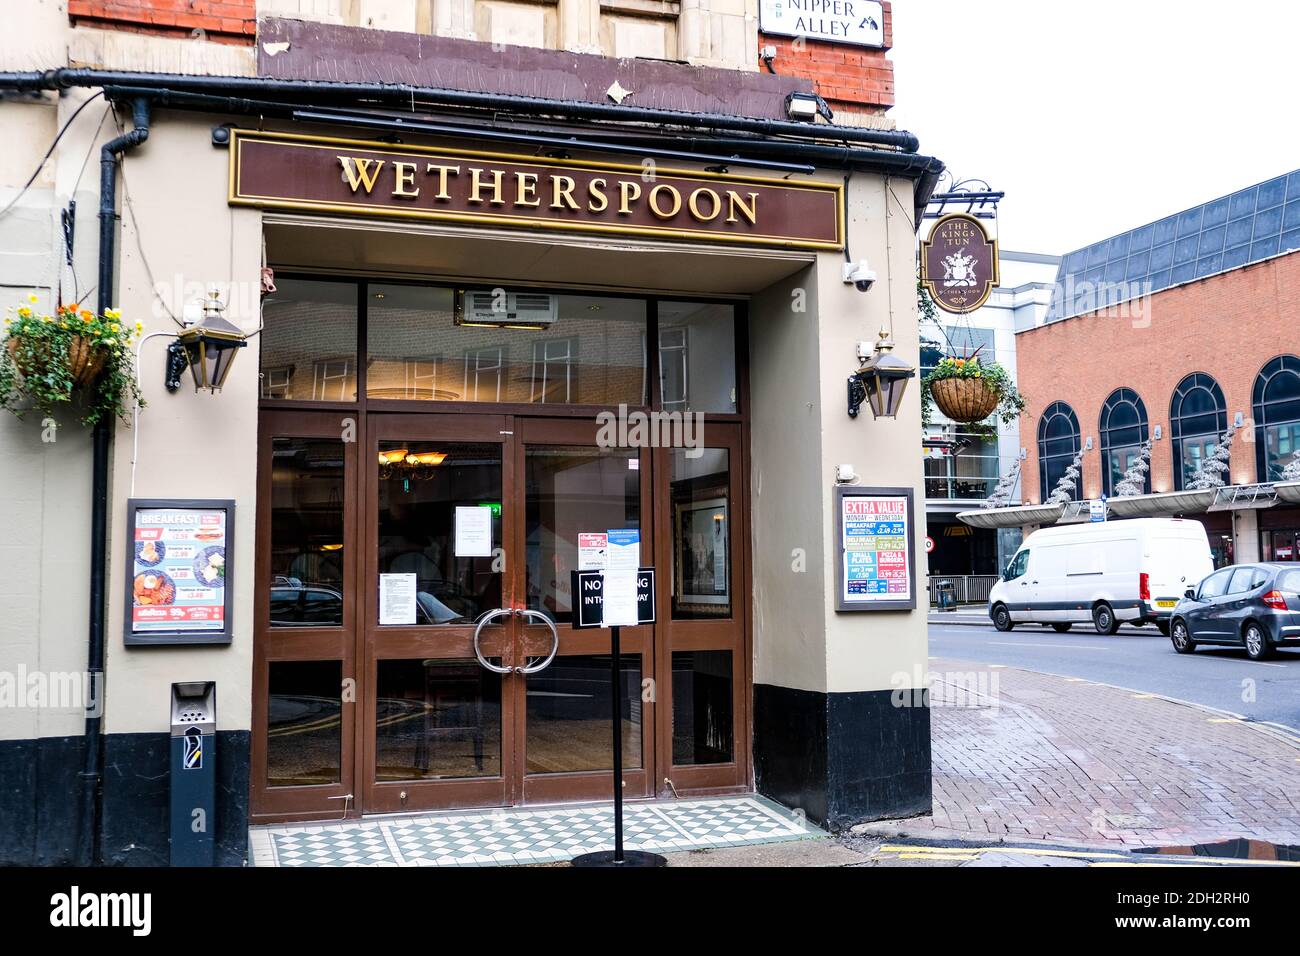 Kingston London, December 09 2020, J D Wetherspoond Pub Facing A Crisis In The Hospitality Industry Due To The COVID-19 Lockdown Stock Photo